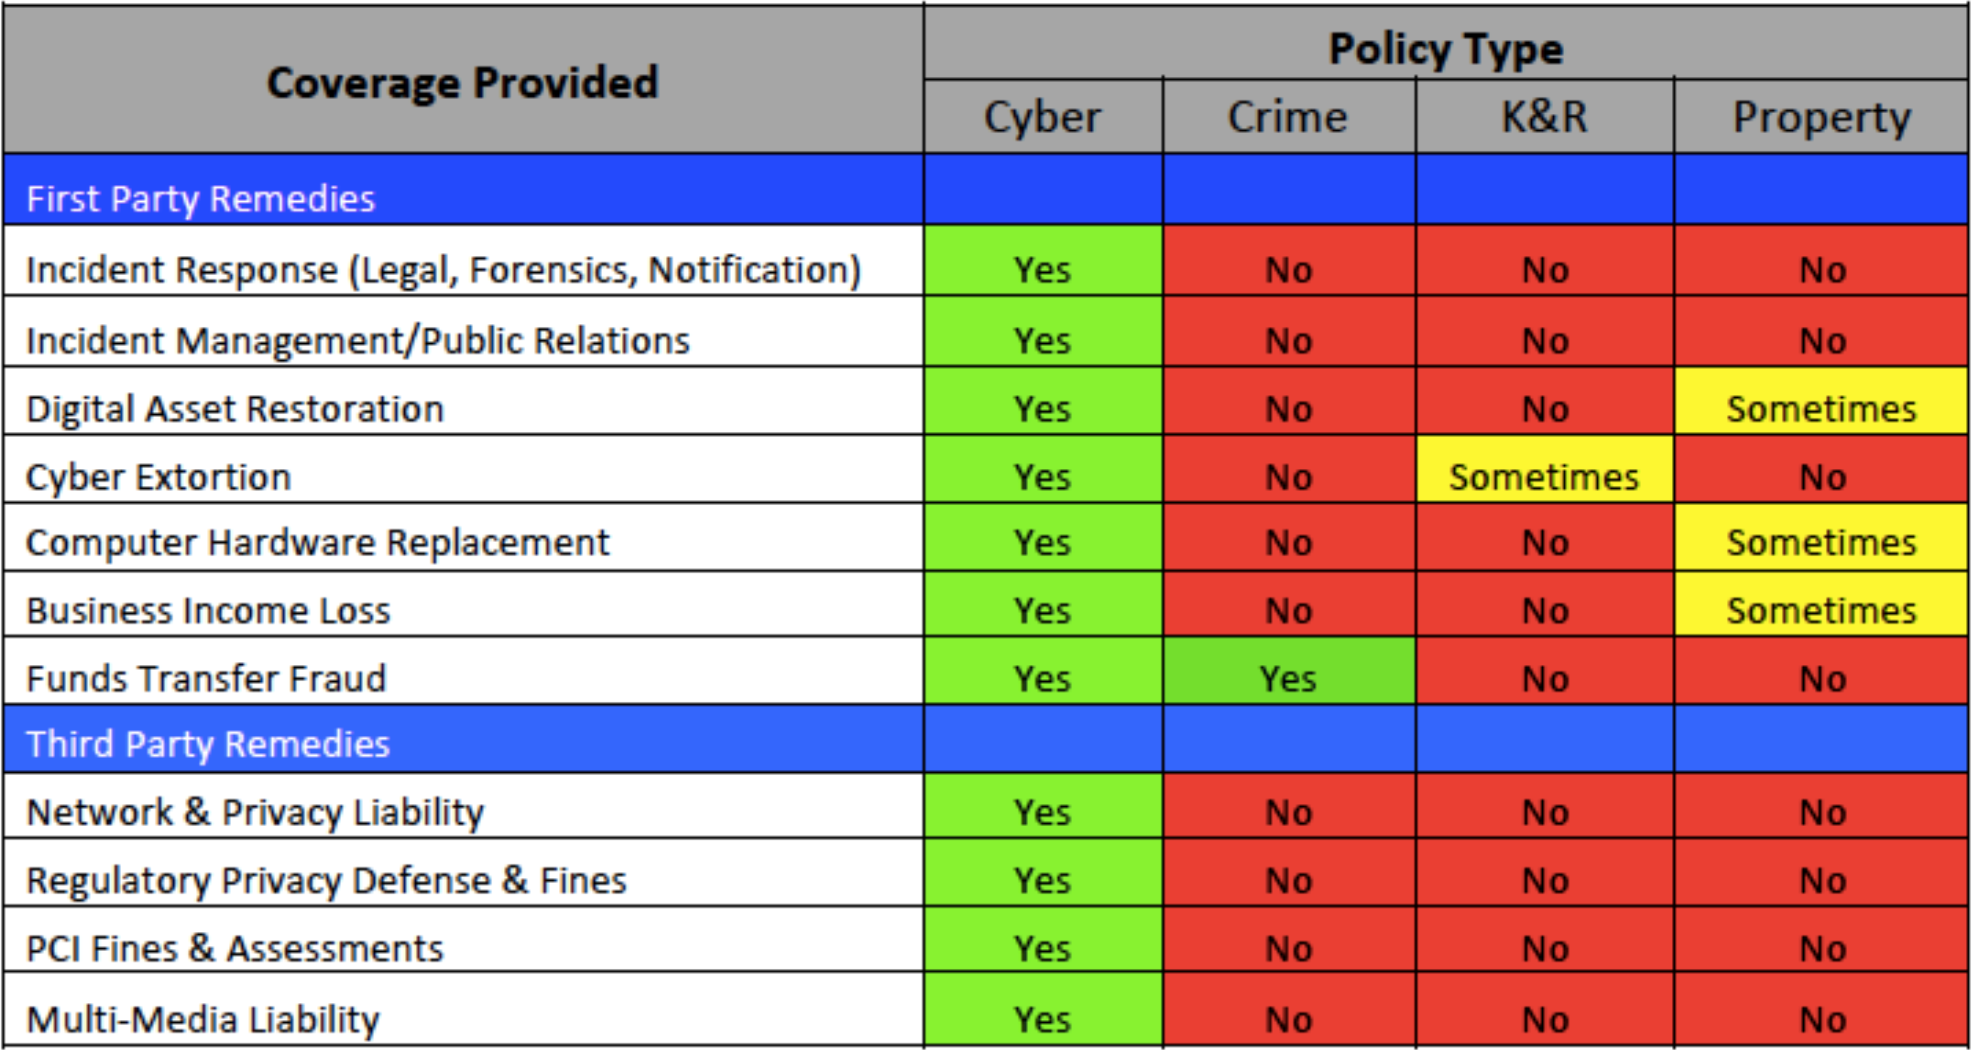 image table showing cyber insurance coverage and policy types